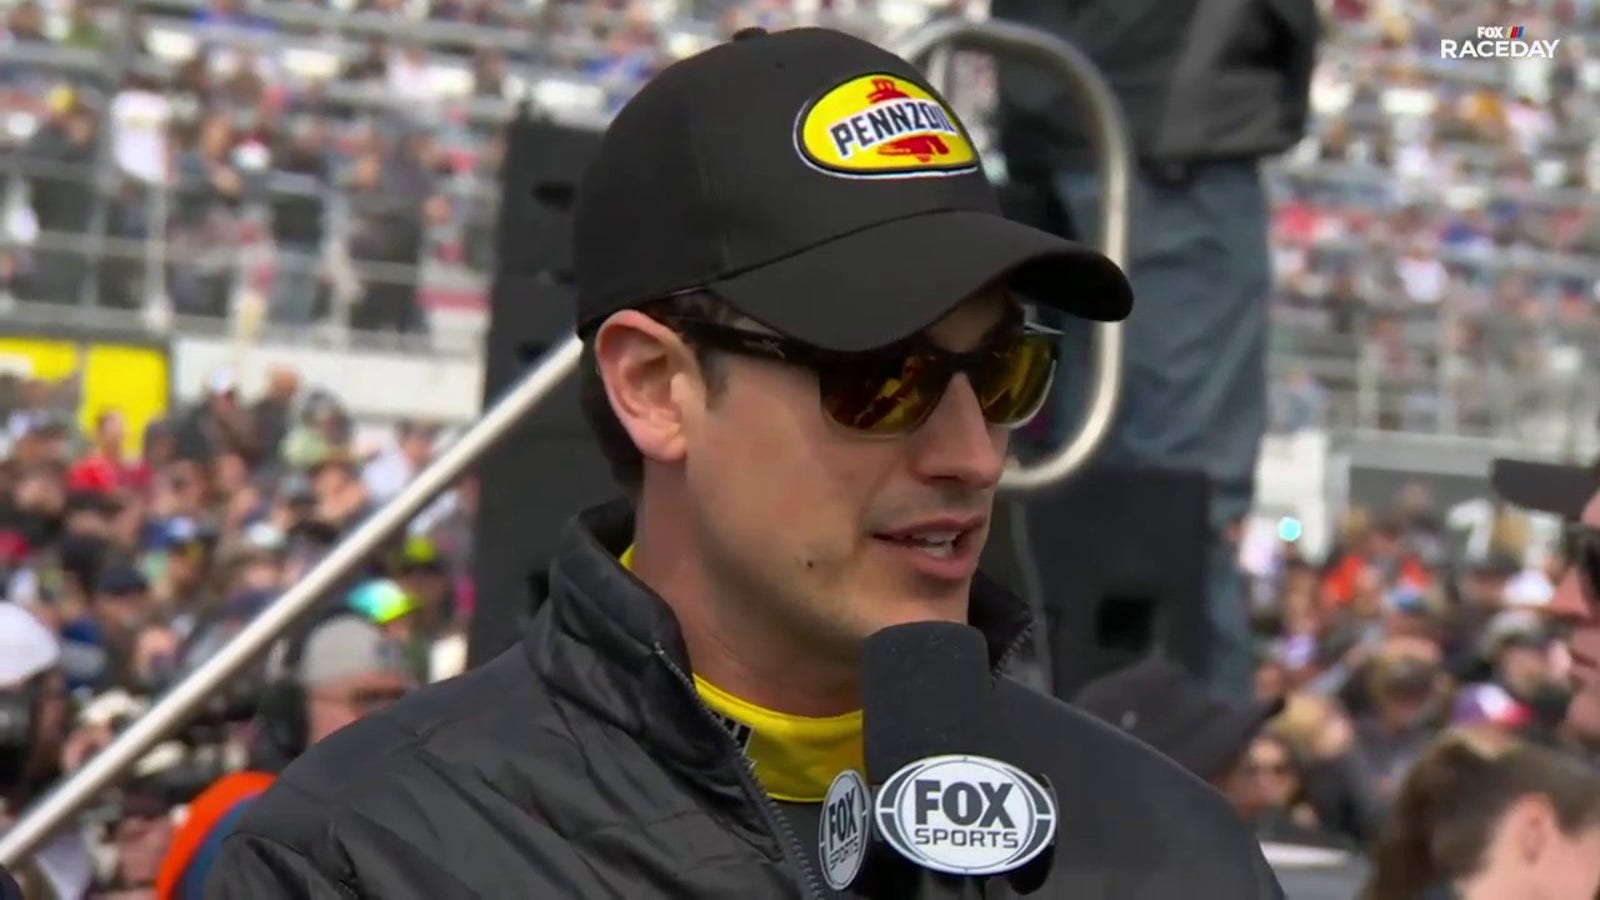 Joey Logano talks about strategy before the Pennzoil 400 